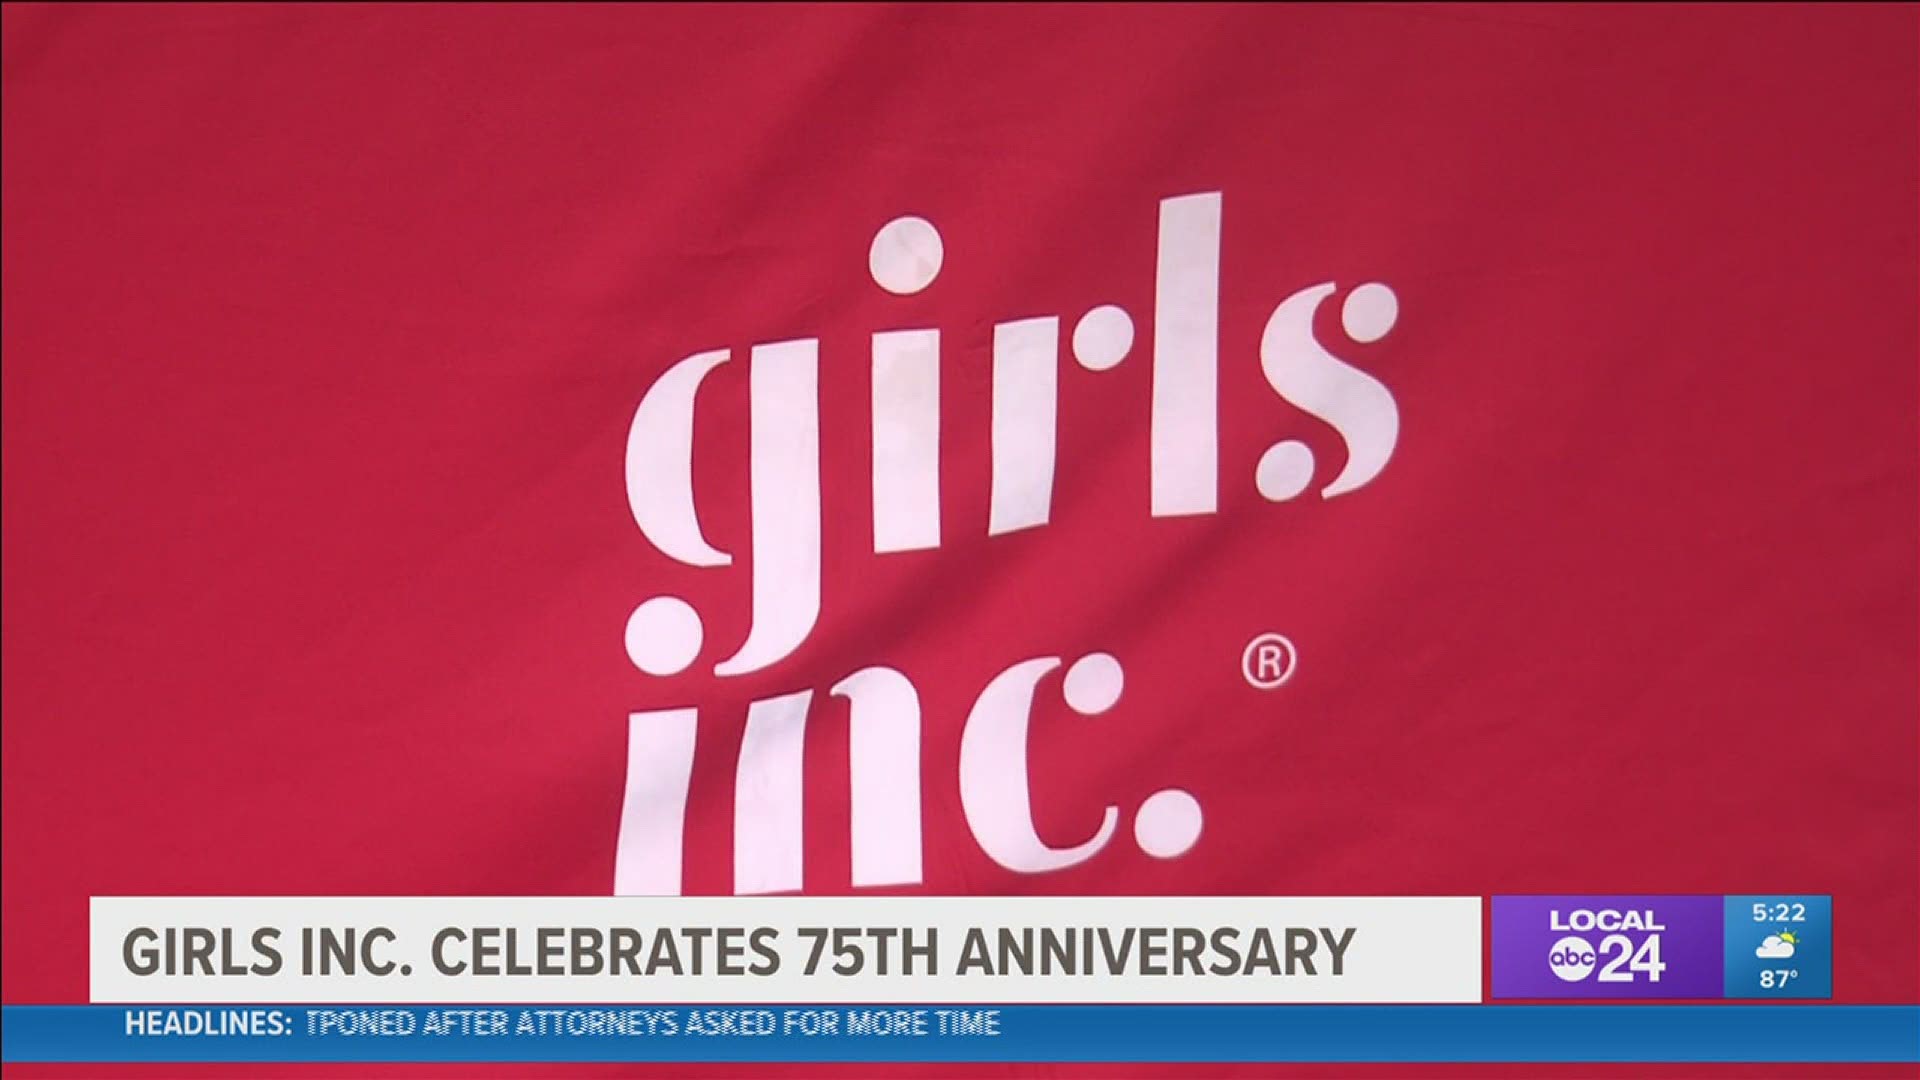 Just a day after holding a groundbreaking on a new facility, Girls Inc. of Memphis is now celebrating its 75th anniversary.